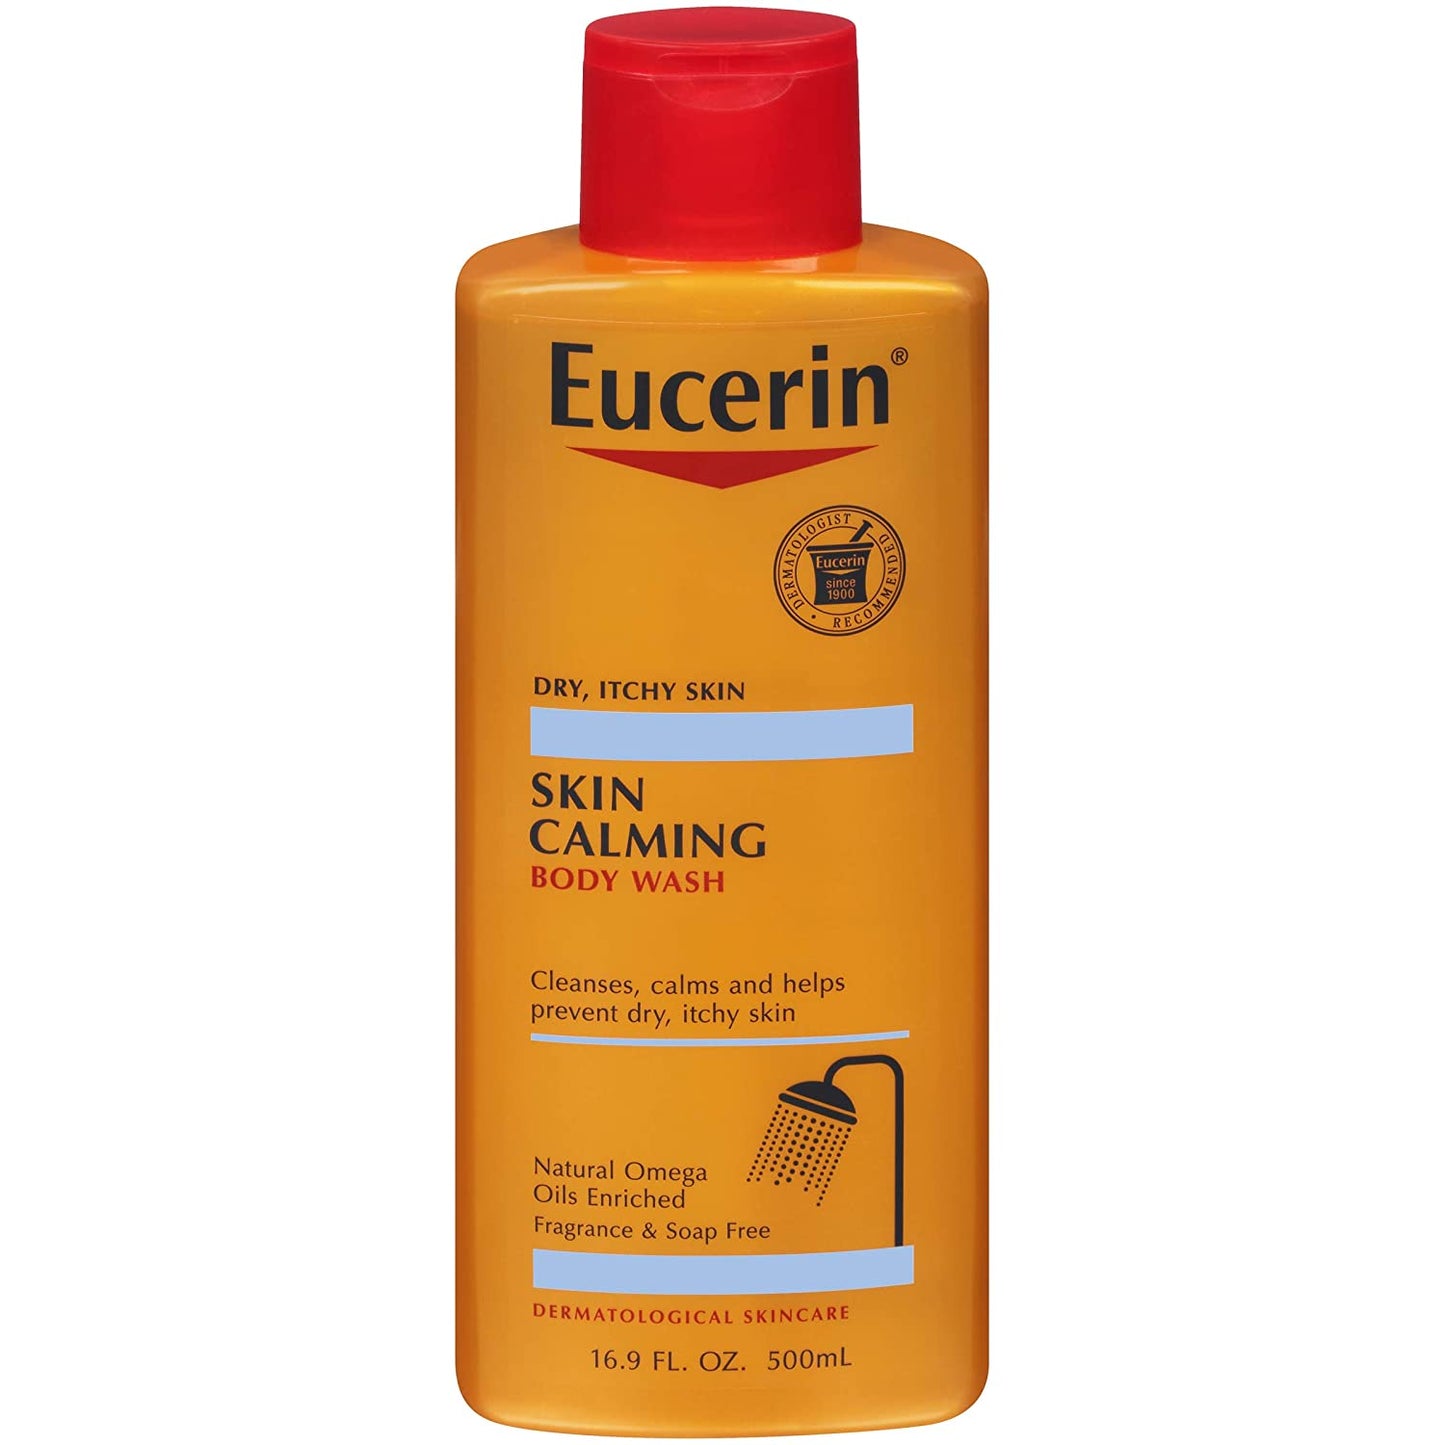 Eucerin Skin Calming Body Wash Enriched with Natural Omega Cleanses & Calms Dry, Itchy Skin, 16.9 fl.oz / 500ml